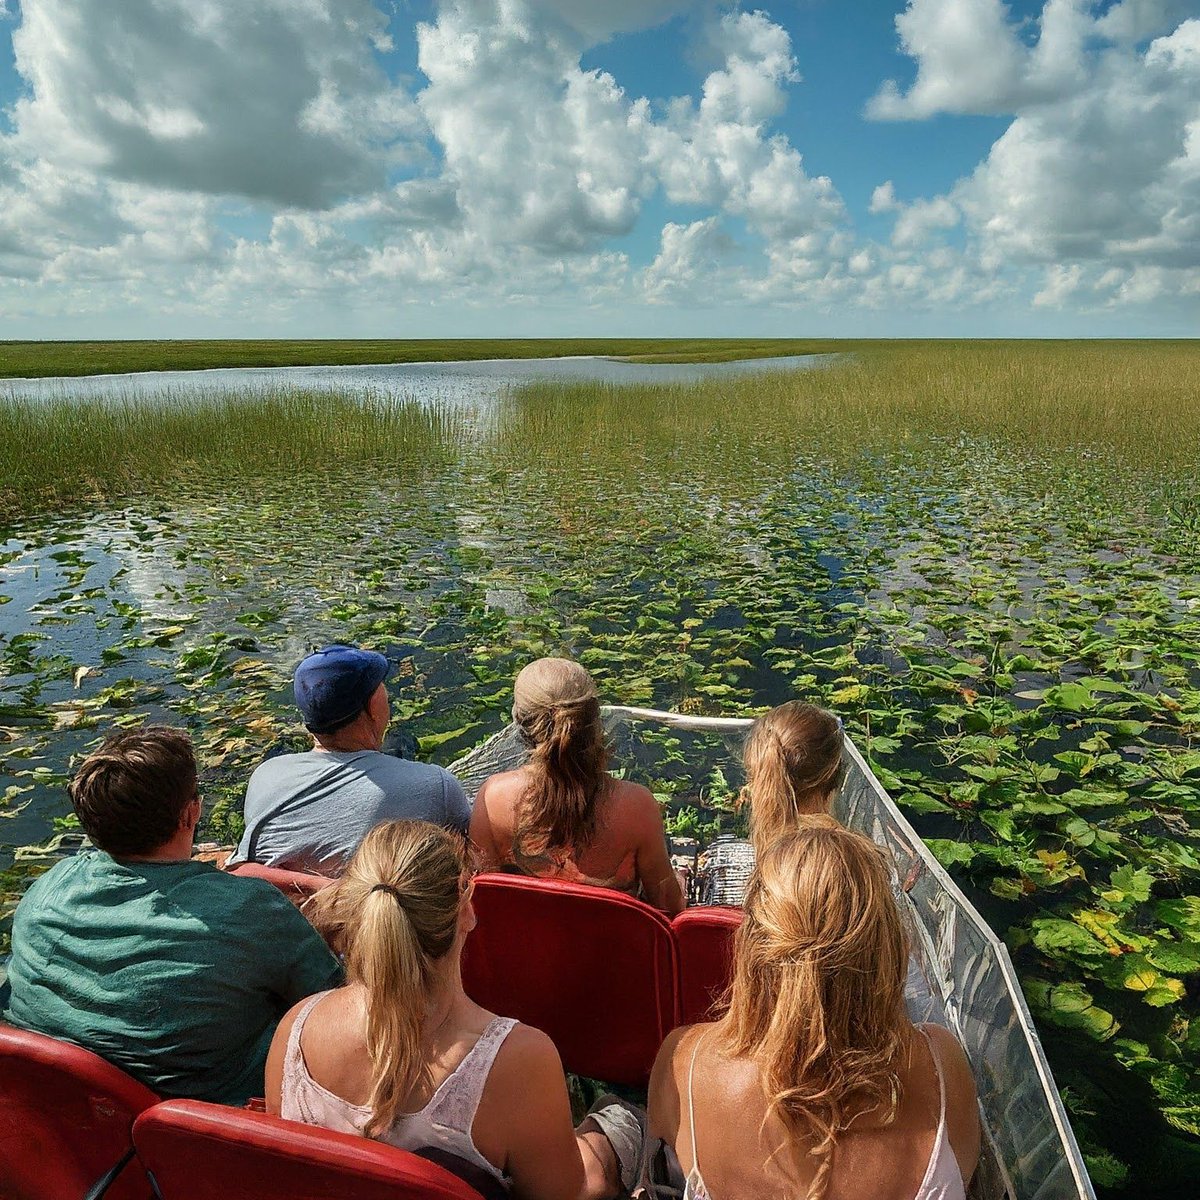 The view from inside the airboat in the Everglades is truly breathtaking. The vast expanse of wetlands, the lush green vegetation, and the diverse wildlife all come together to create a truly unique and unforgettable experience. #everglades
#evergladeadventure ‍♀️️
#florida